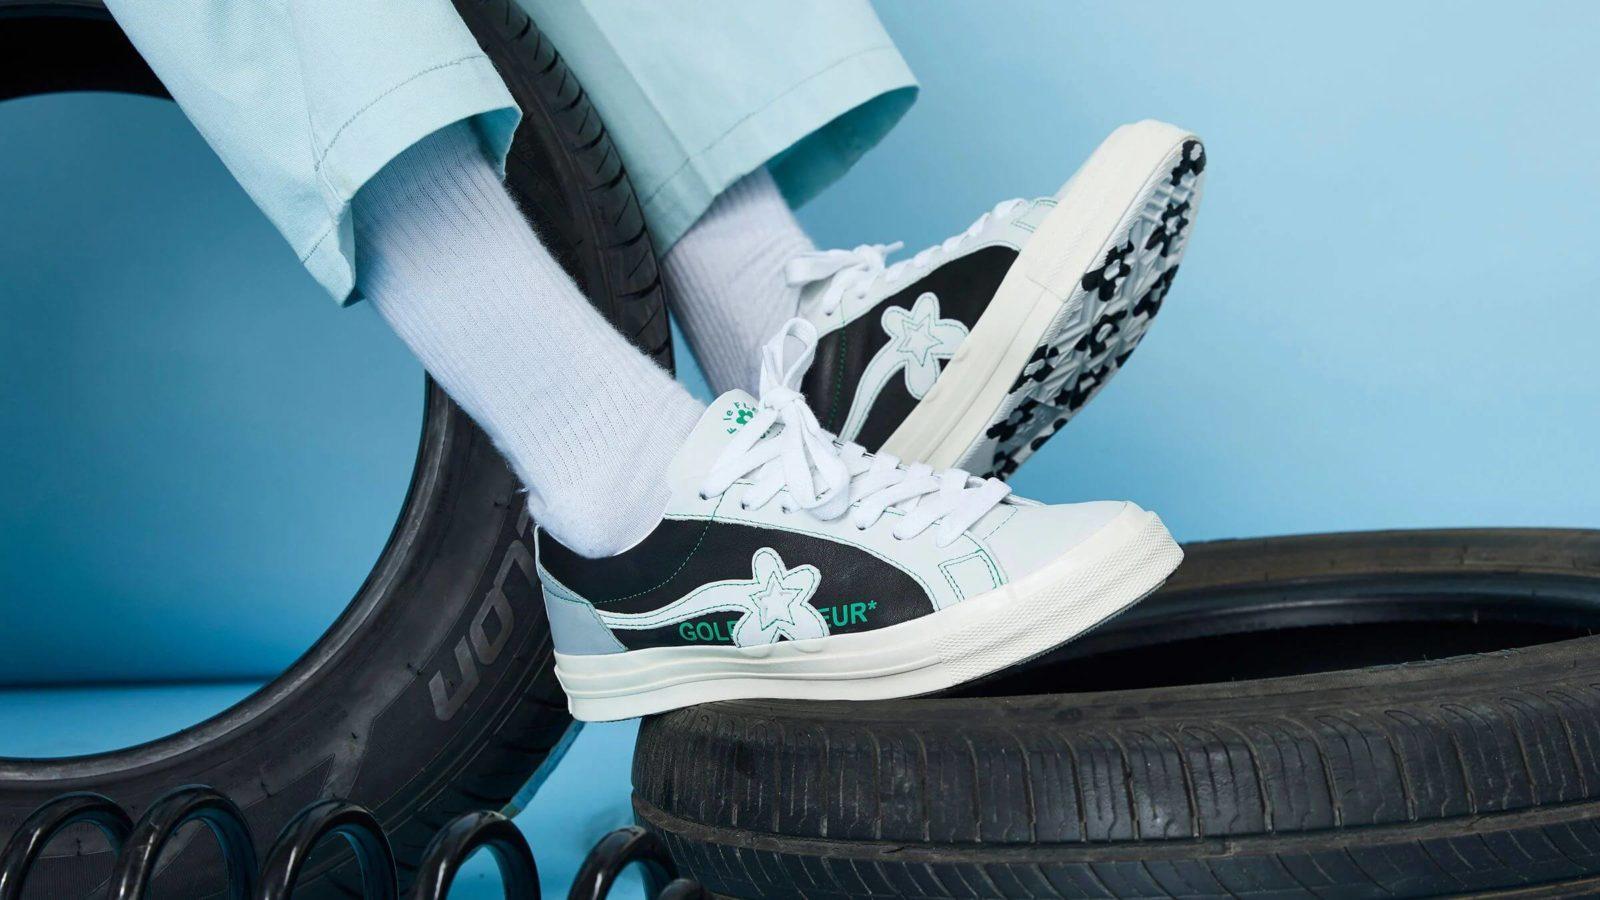 The Tyler, the Creator x Converse GOLF le FLEUR* 'Industrial' Pack